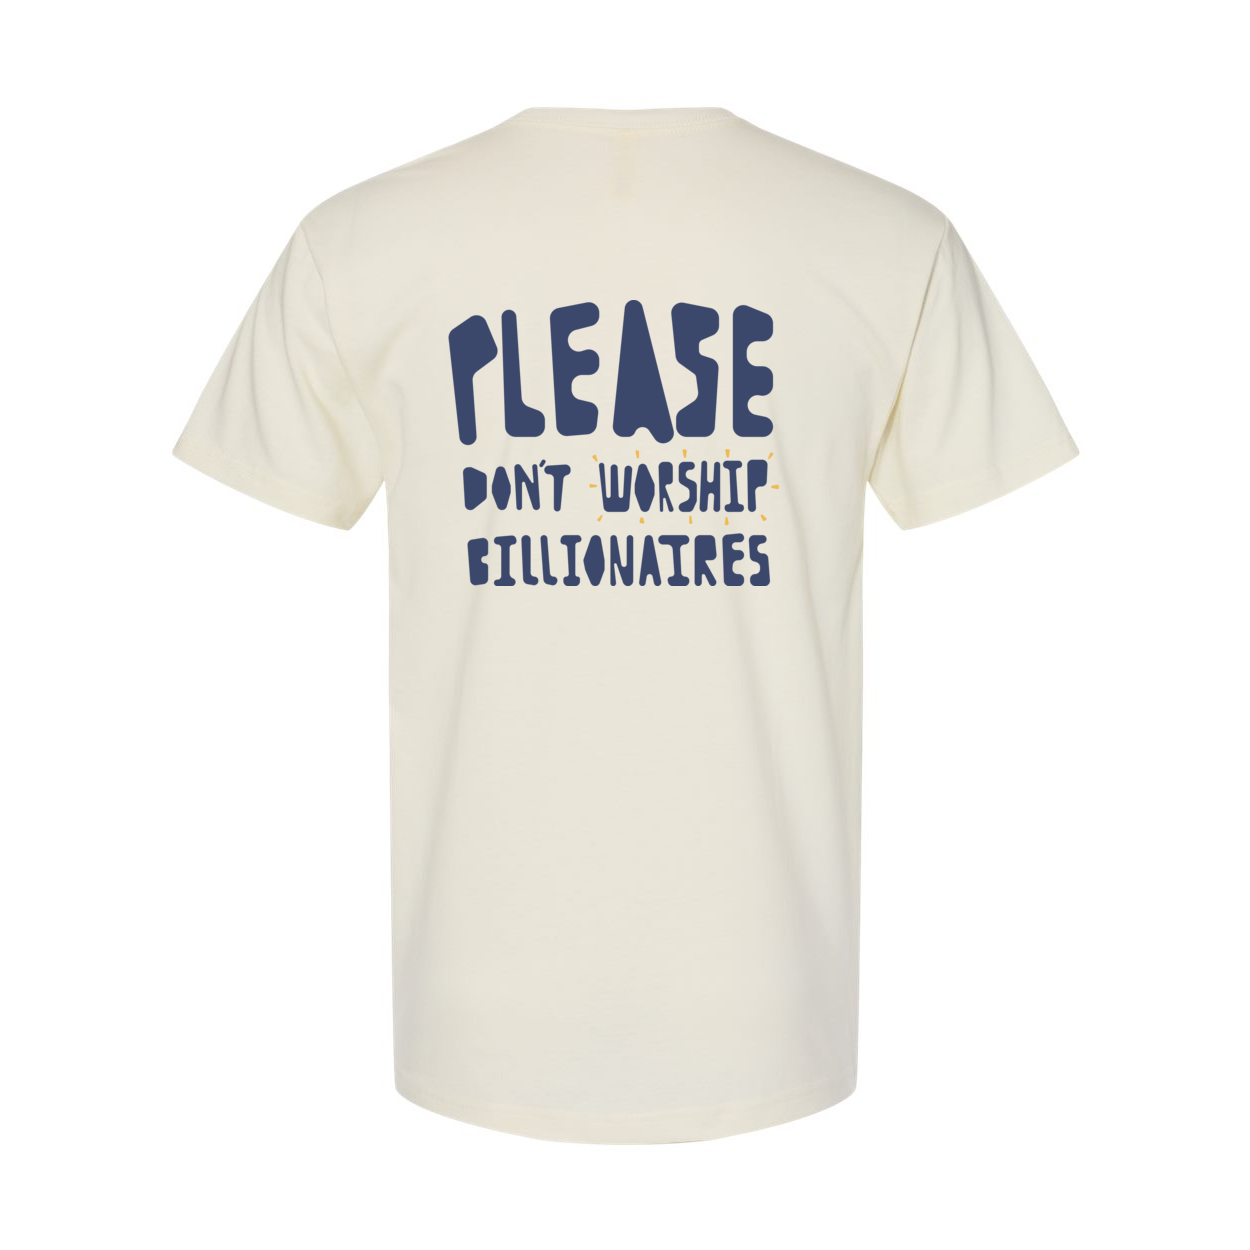 'PLEASE DON'T WORSHIP BILLIONAIRES' blue text on back of natural shirt.